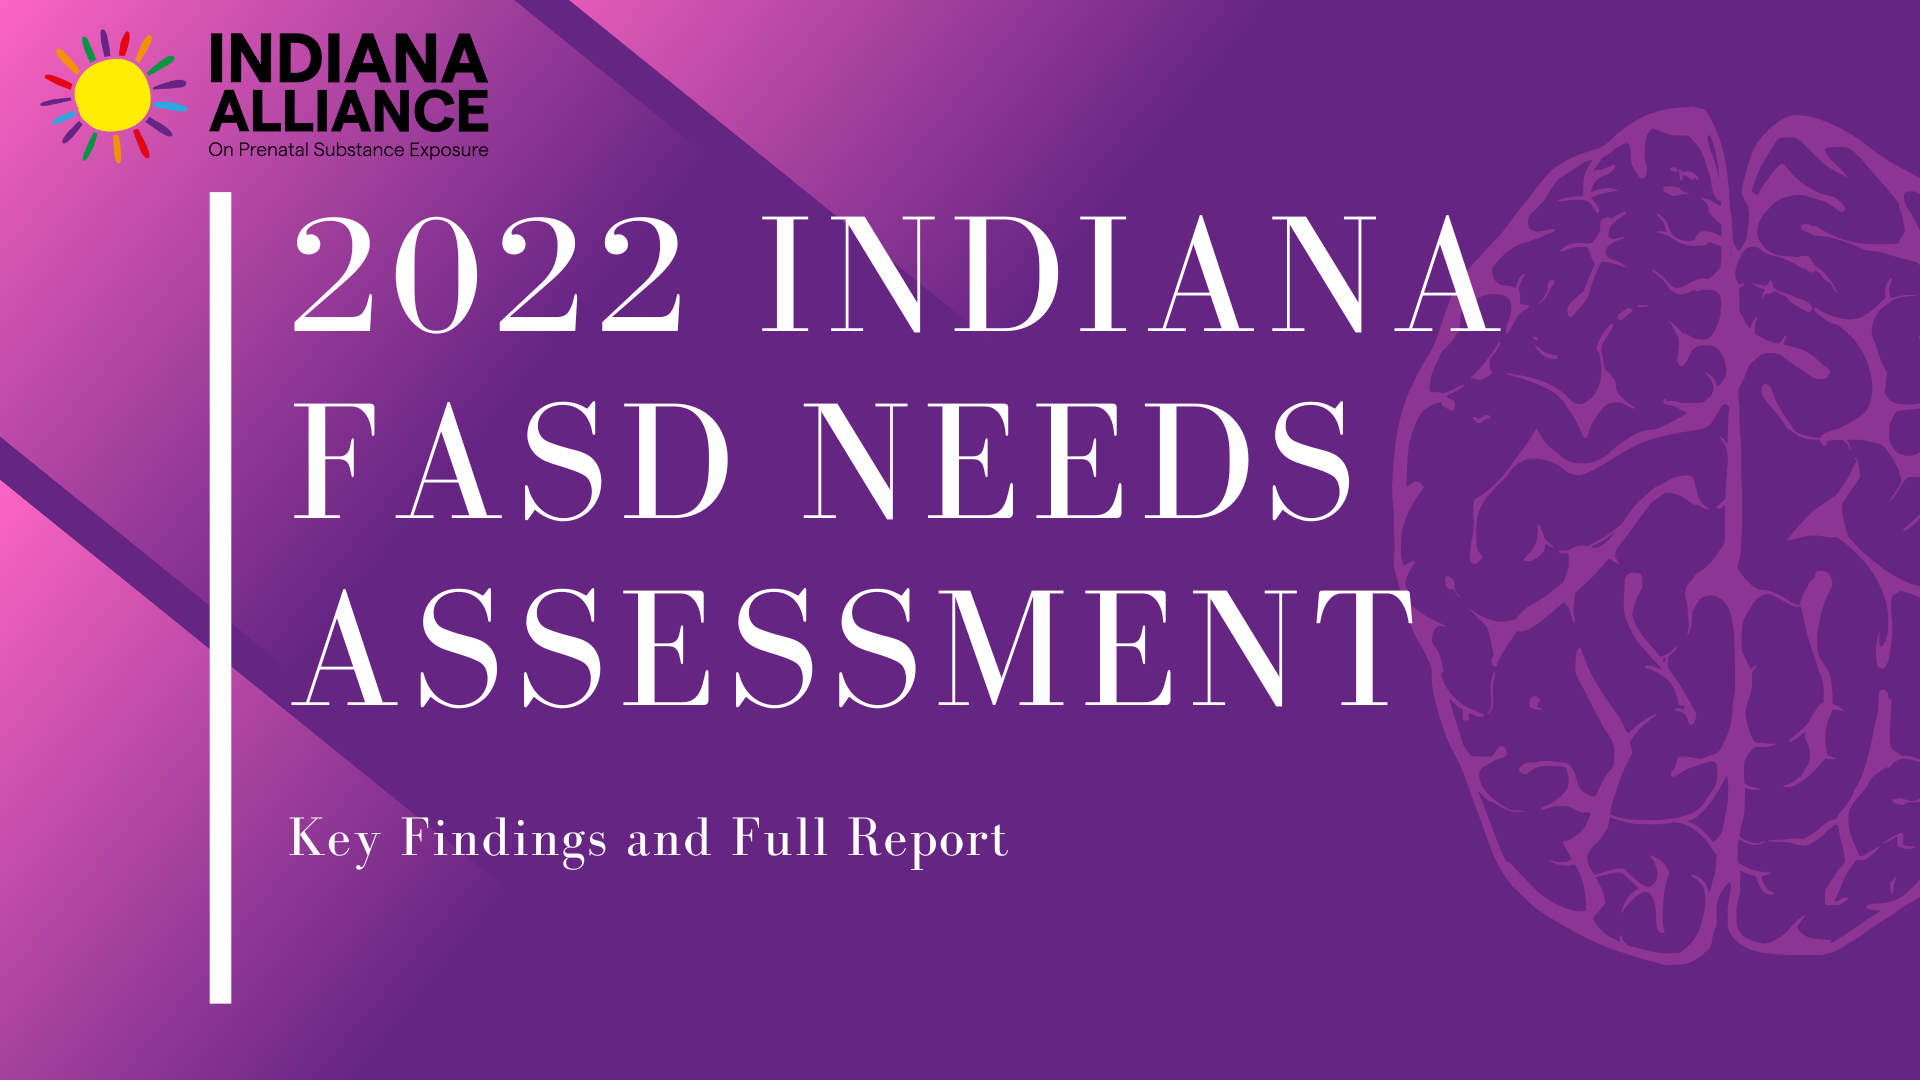 2022 Indiana FASD Needs Assessment. Key findings and full report.